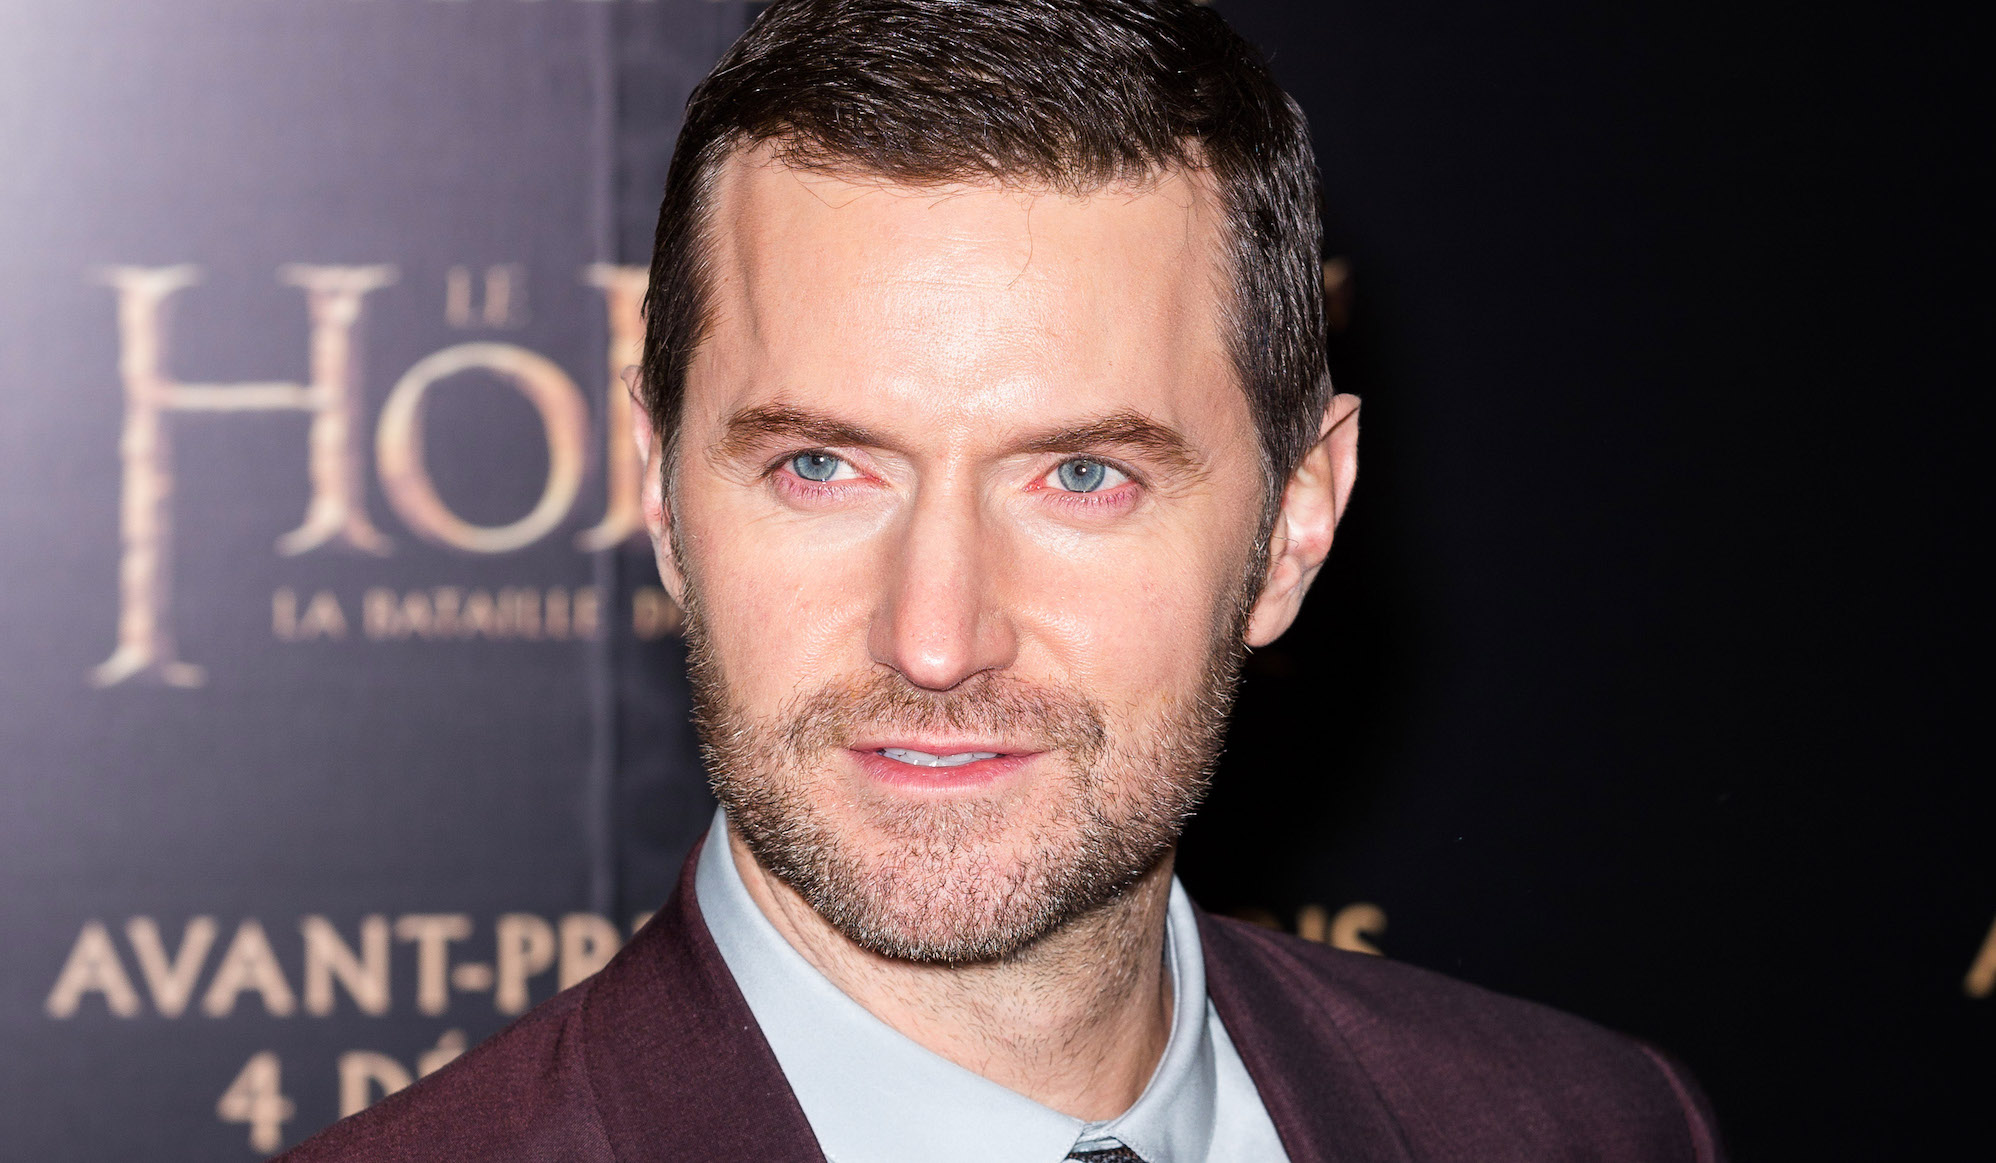 Richard Armitage on sexuality, male partner and coming out